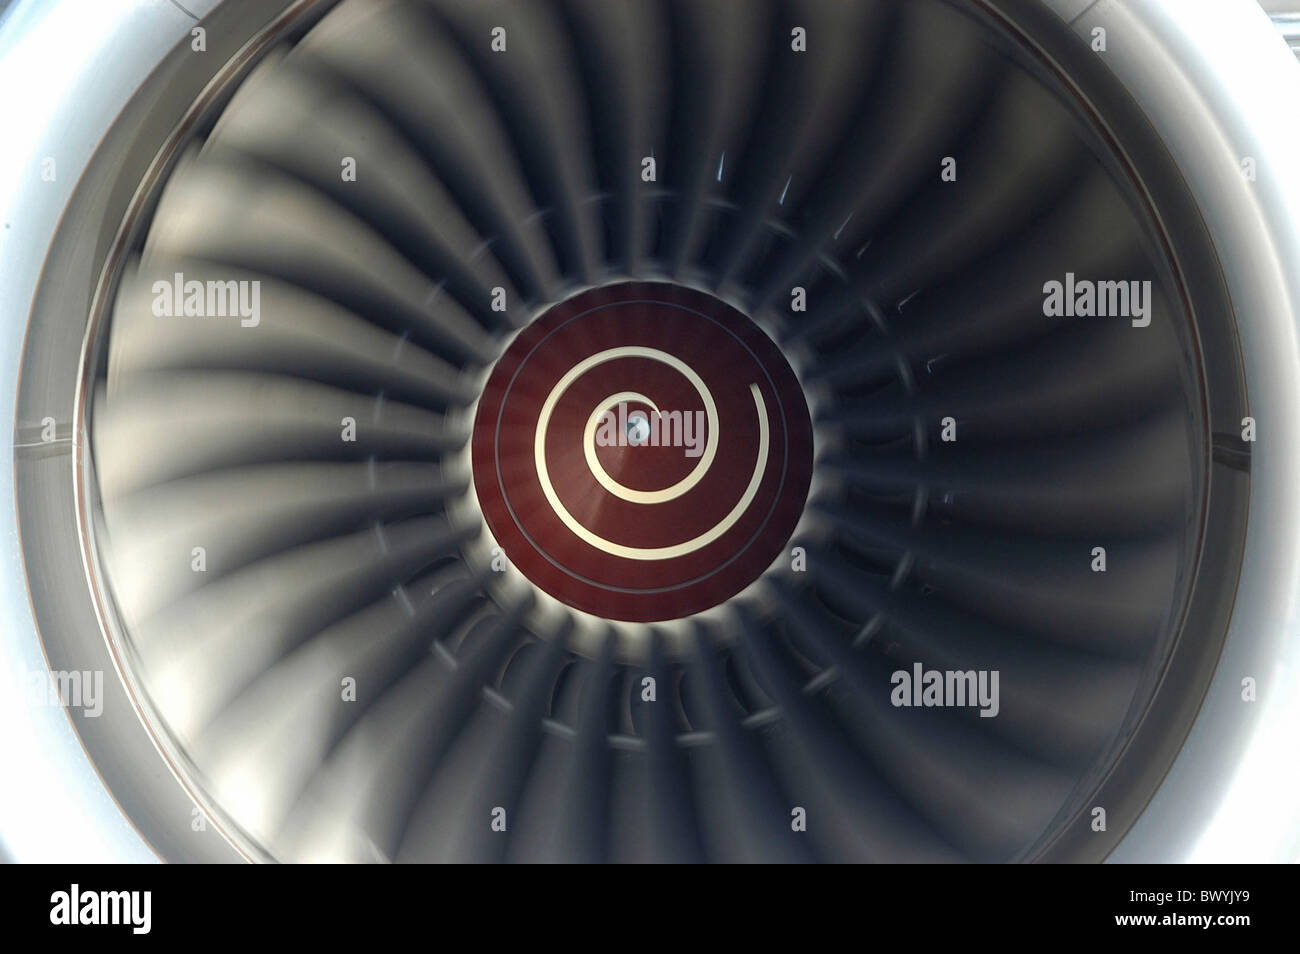 A 340 600 admittance Airbus airplane aviation Fan´s shovels jet jet airplane jet engine nozzle Rolls Royce Stock Photo